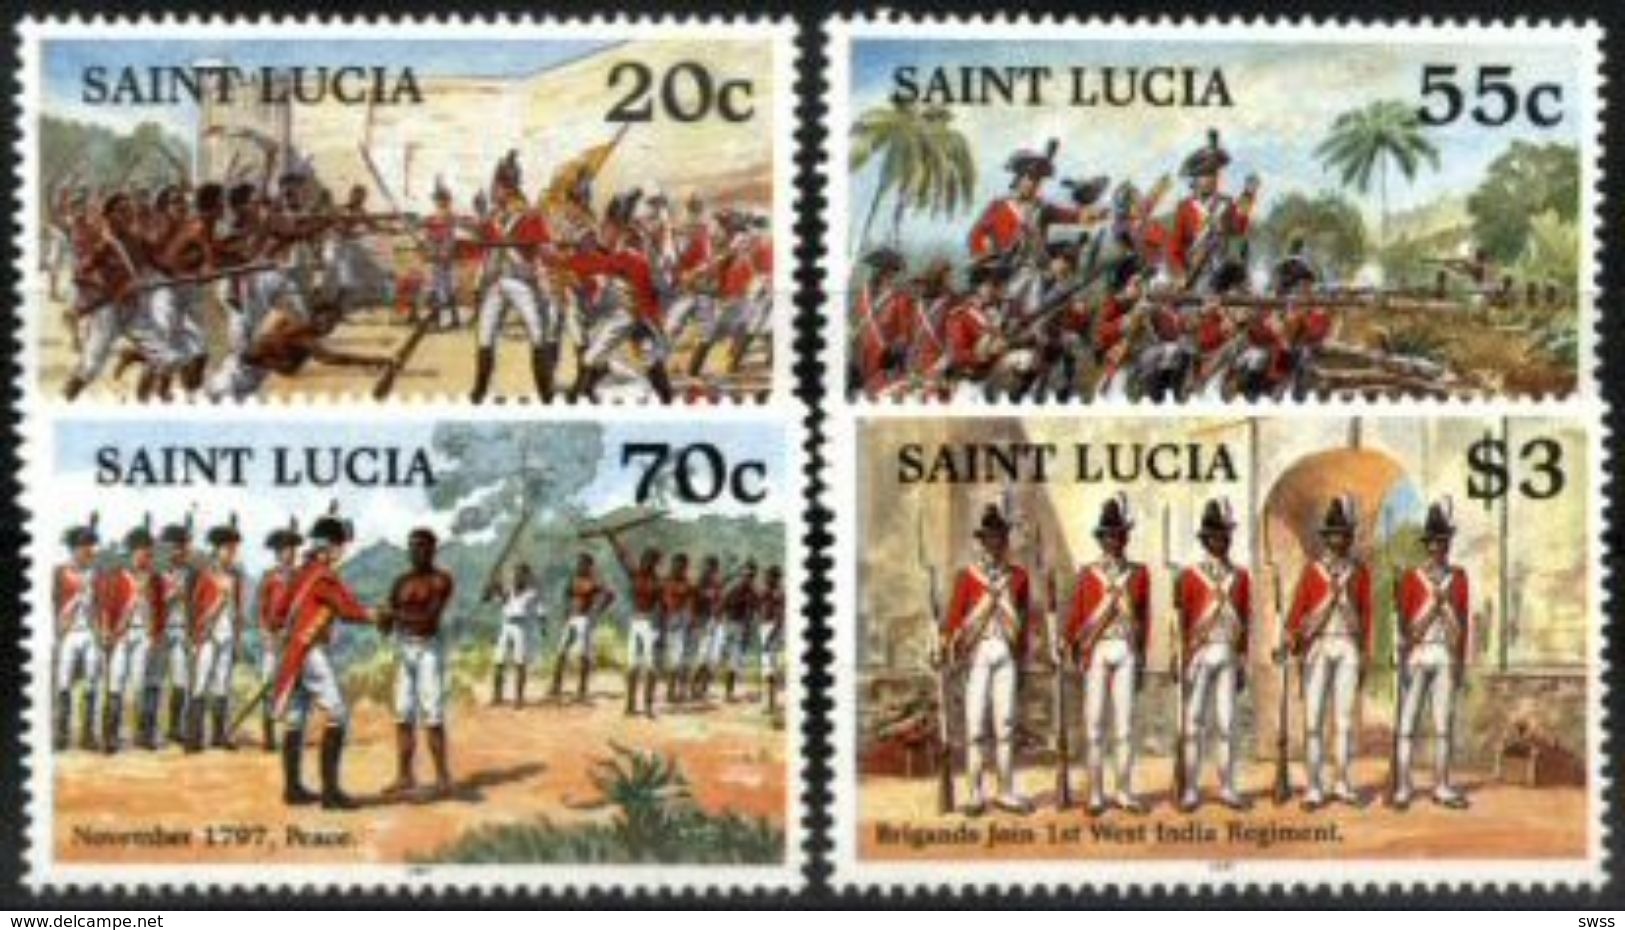 ST. LUCIA, 1997, HISTORY, BICENTENARY OF THE REVOLT AGAINST THE BRITISH ARMY, YV#1061-64, MNH - St.Lucia (1979-...)